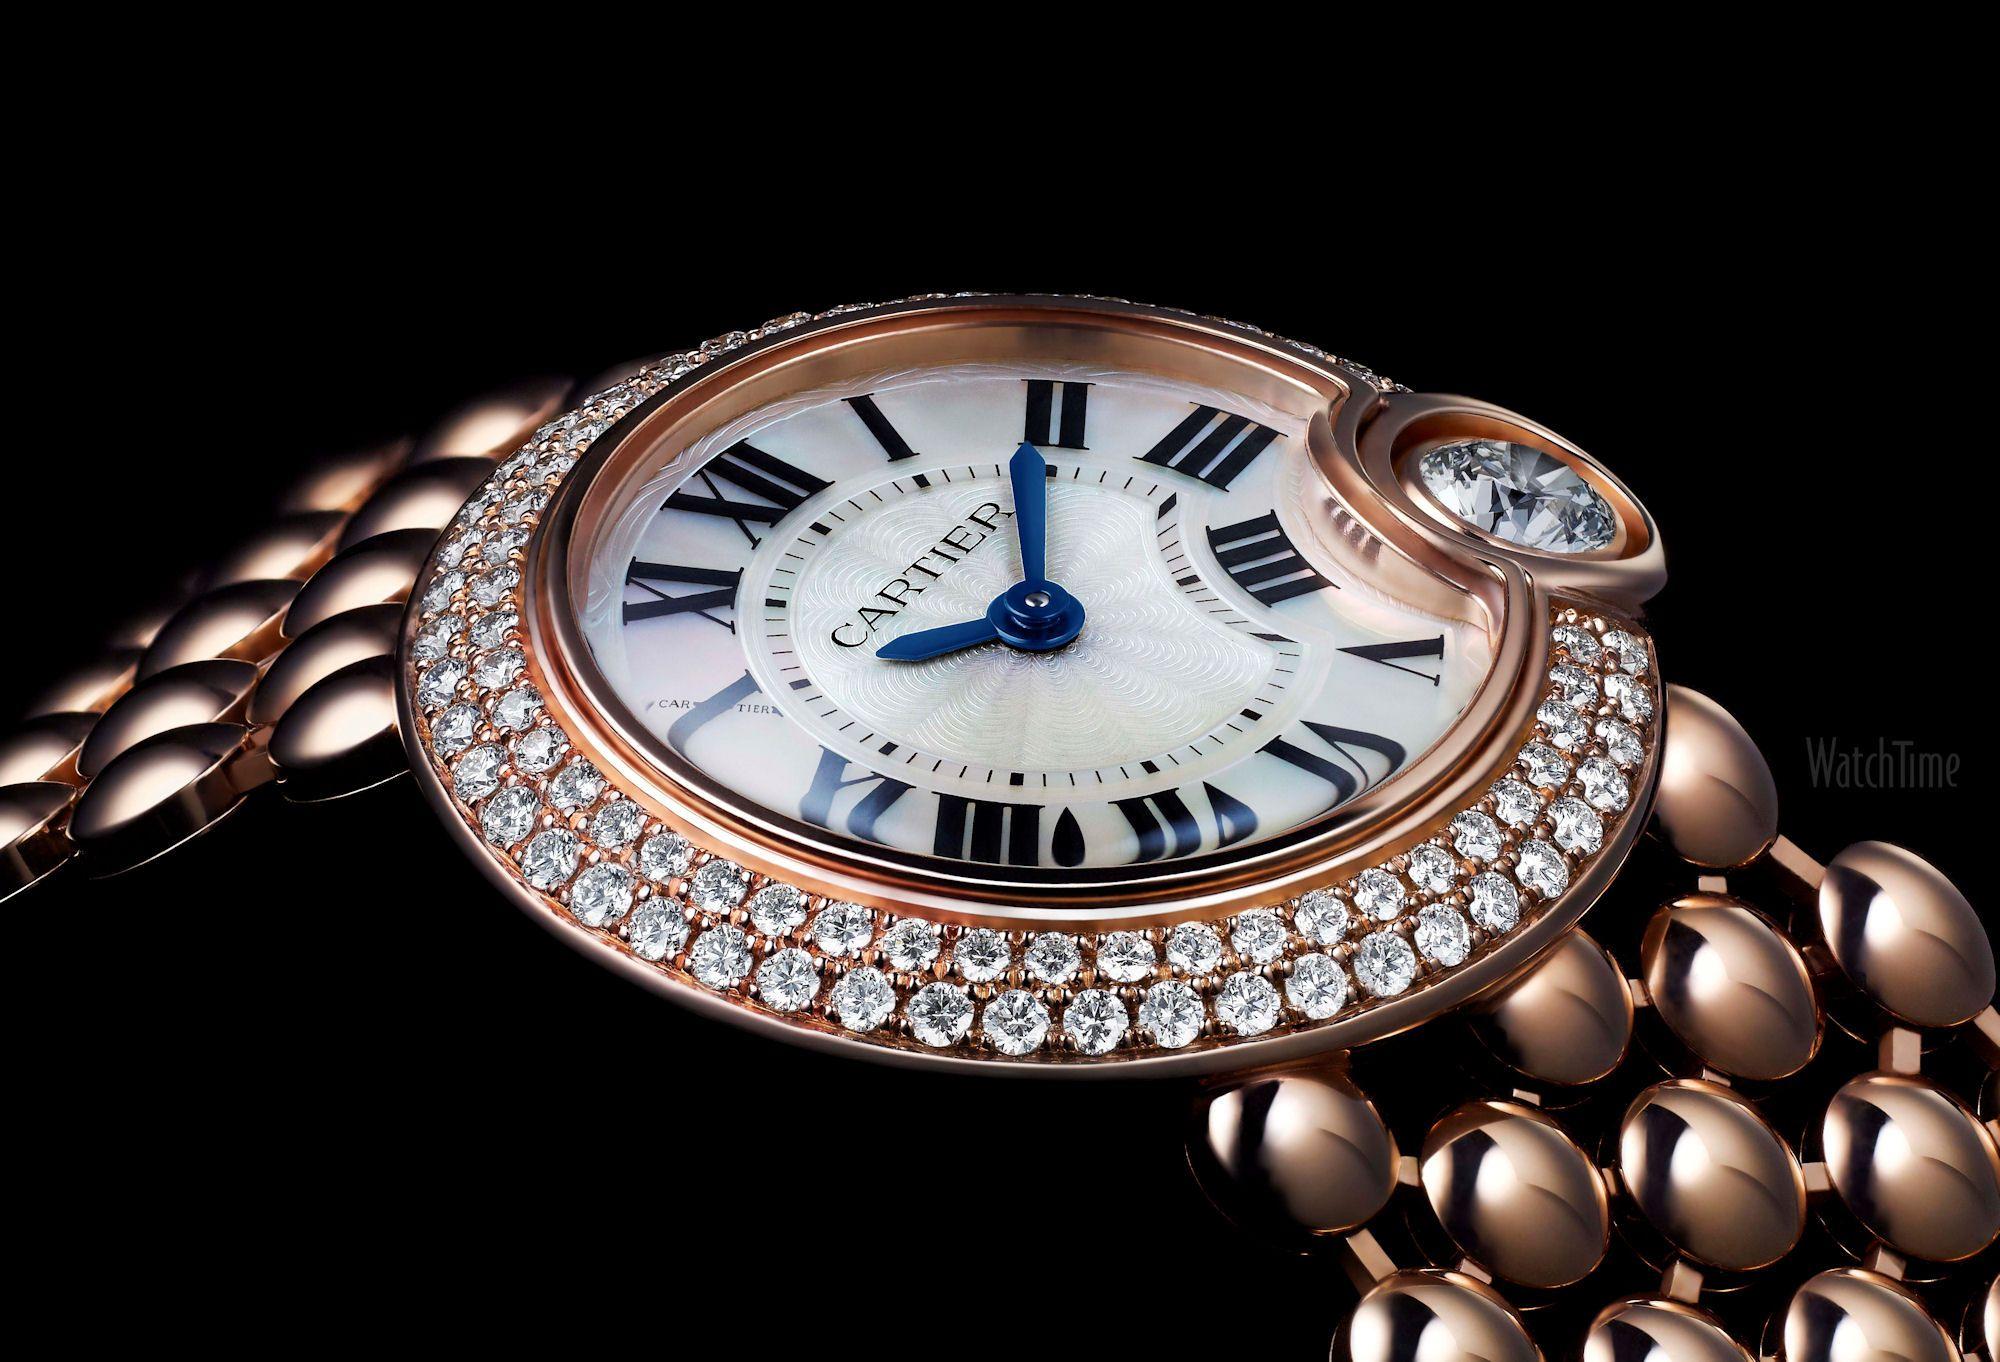 Watch Wallpaper: 11 Cartier Watches from SIHH. WatchTime's No